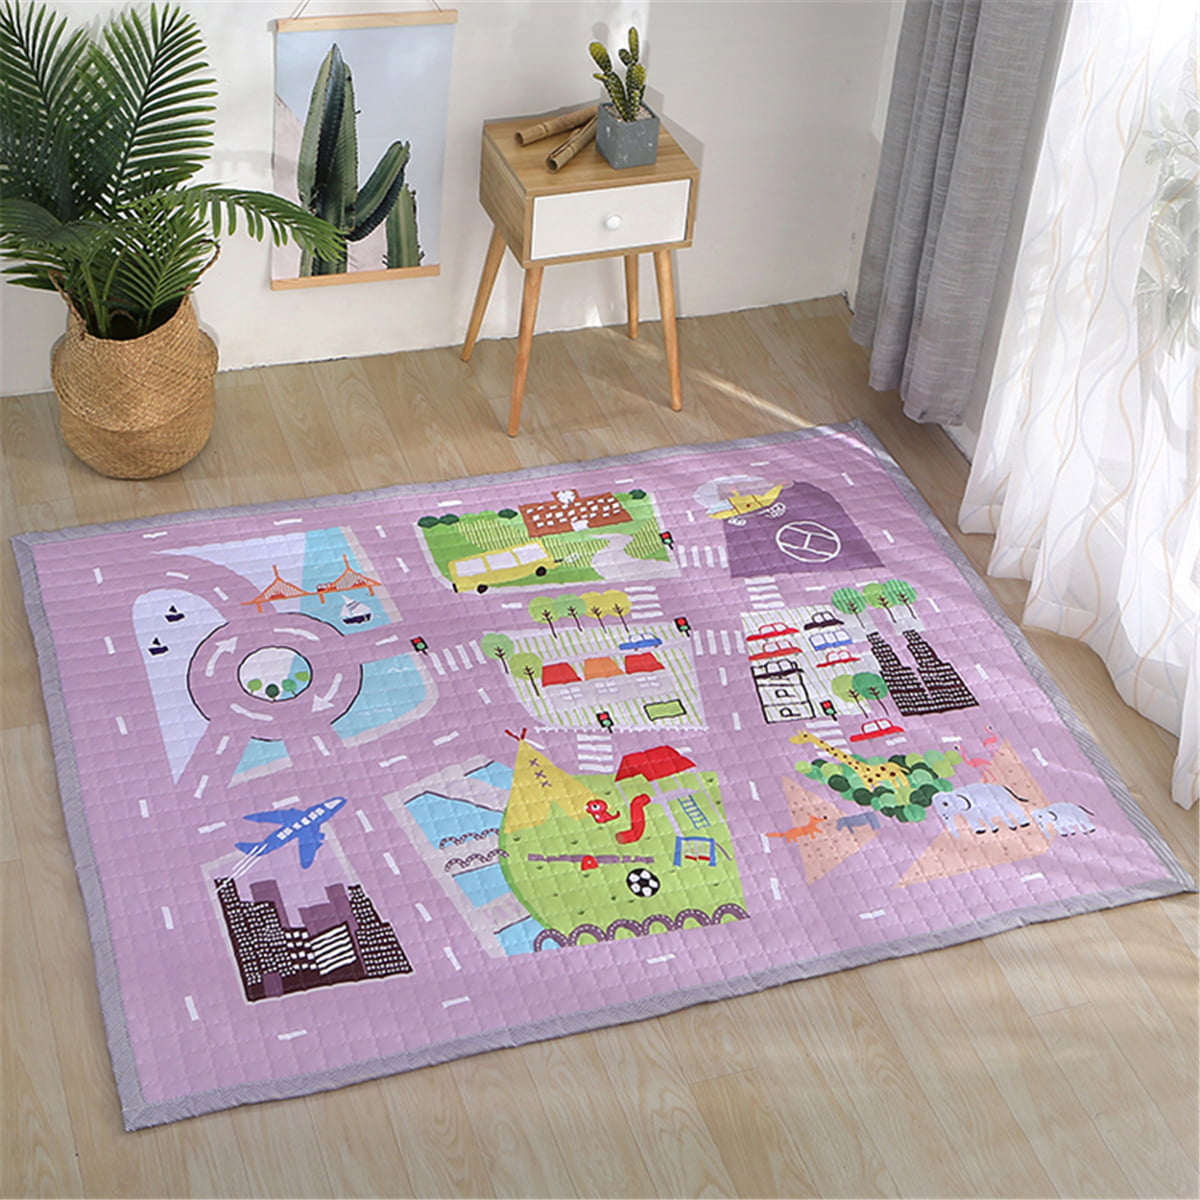 57x77 inches Large Baby Crawling Mat Anti-Slip Area Rugs Play Mat Game